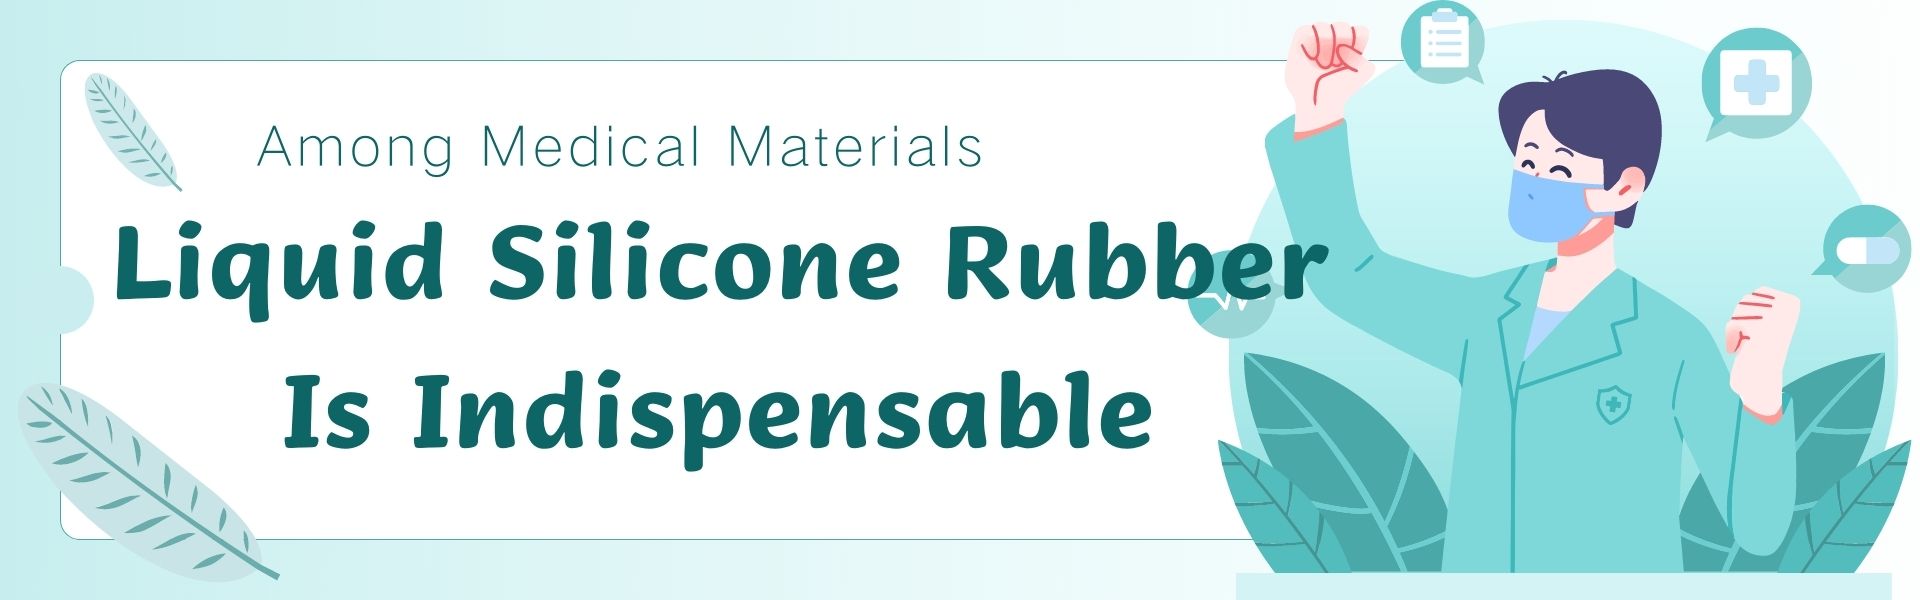 Among Medical Materials, Liquid Silicone Rubber Is Indispensable